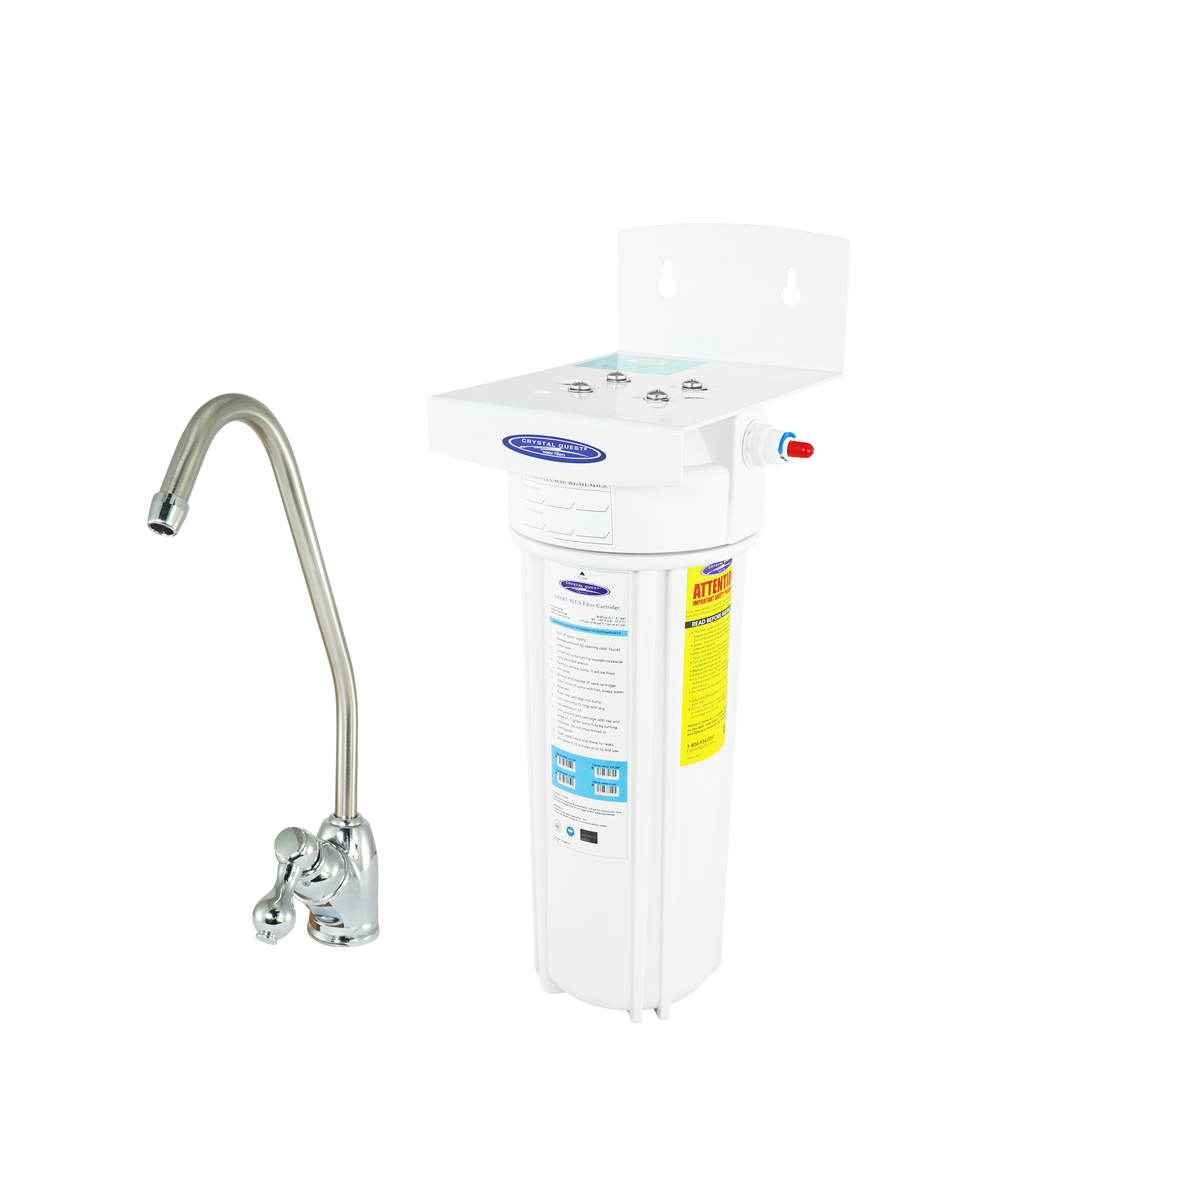 Single Arsenic Under Sink Water Filter System - Under Sink Water Filters - Crystal Quest